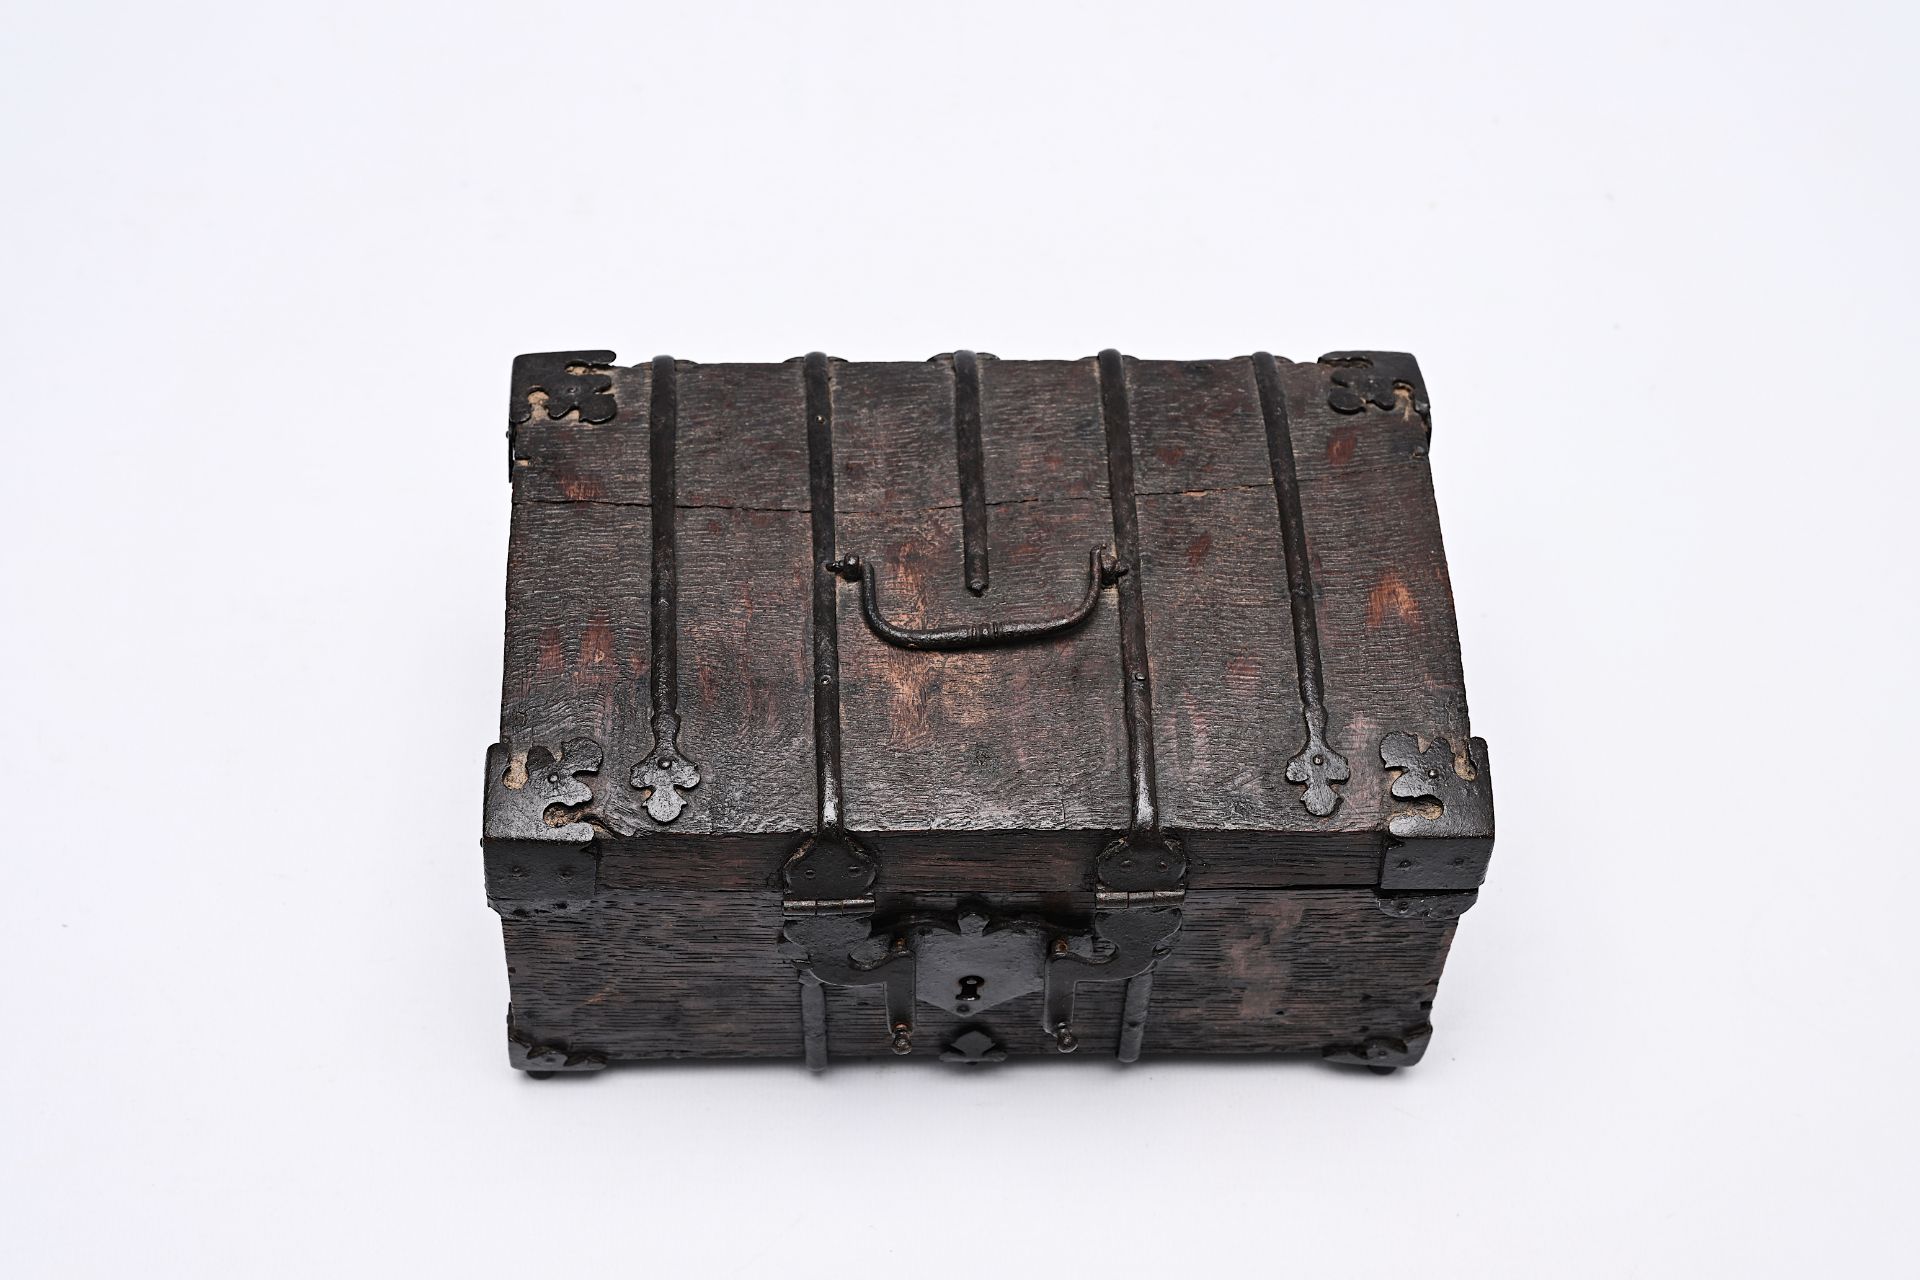 A wooden chest with iron mounts, Western Europe, 16th C. - Image 8 of 11